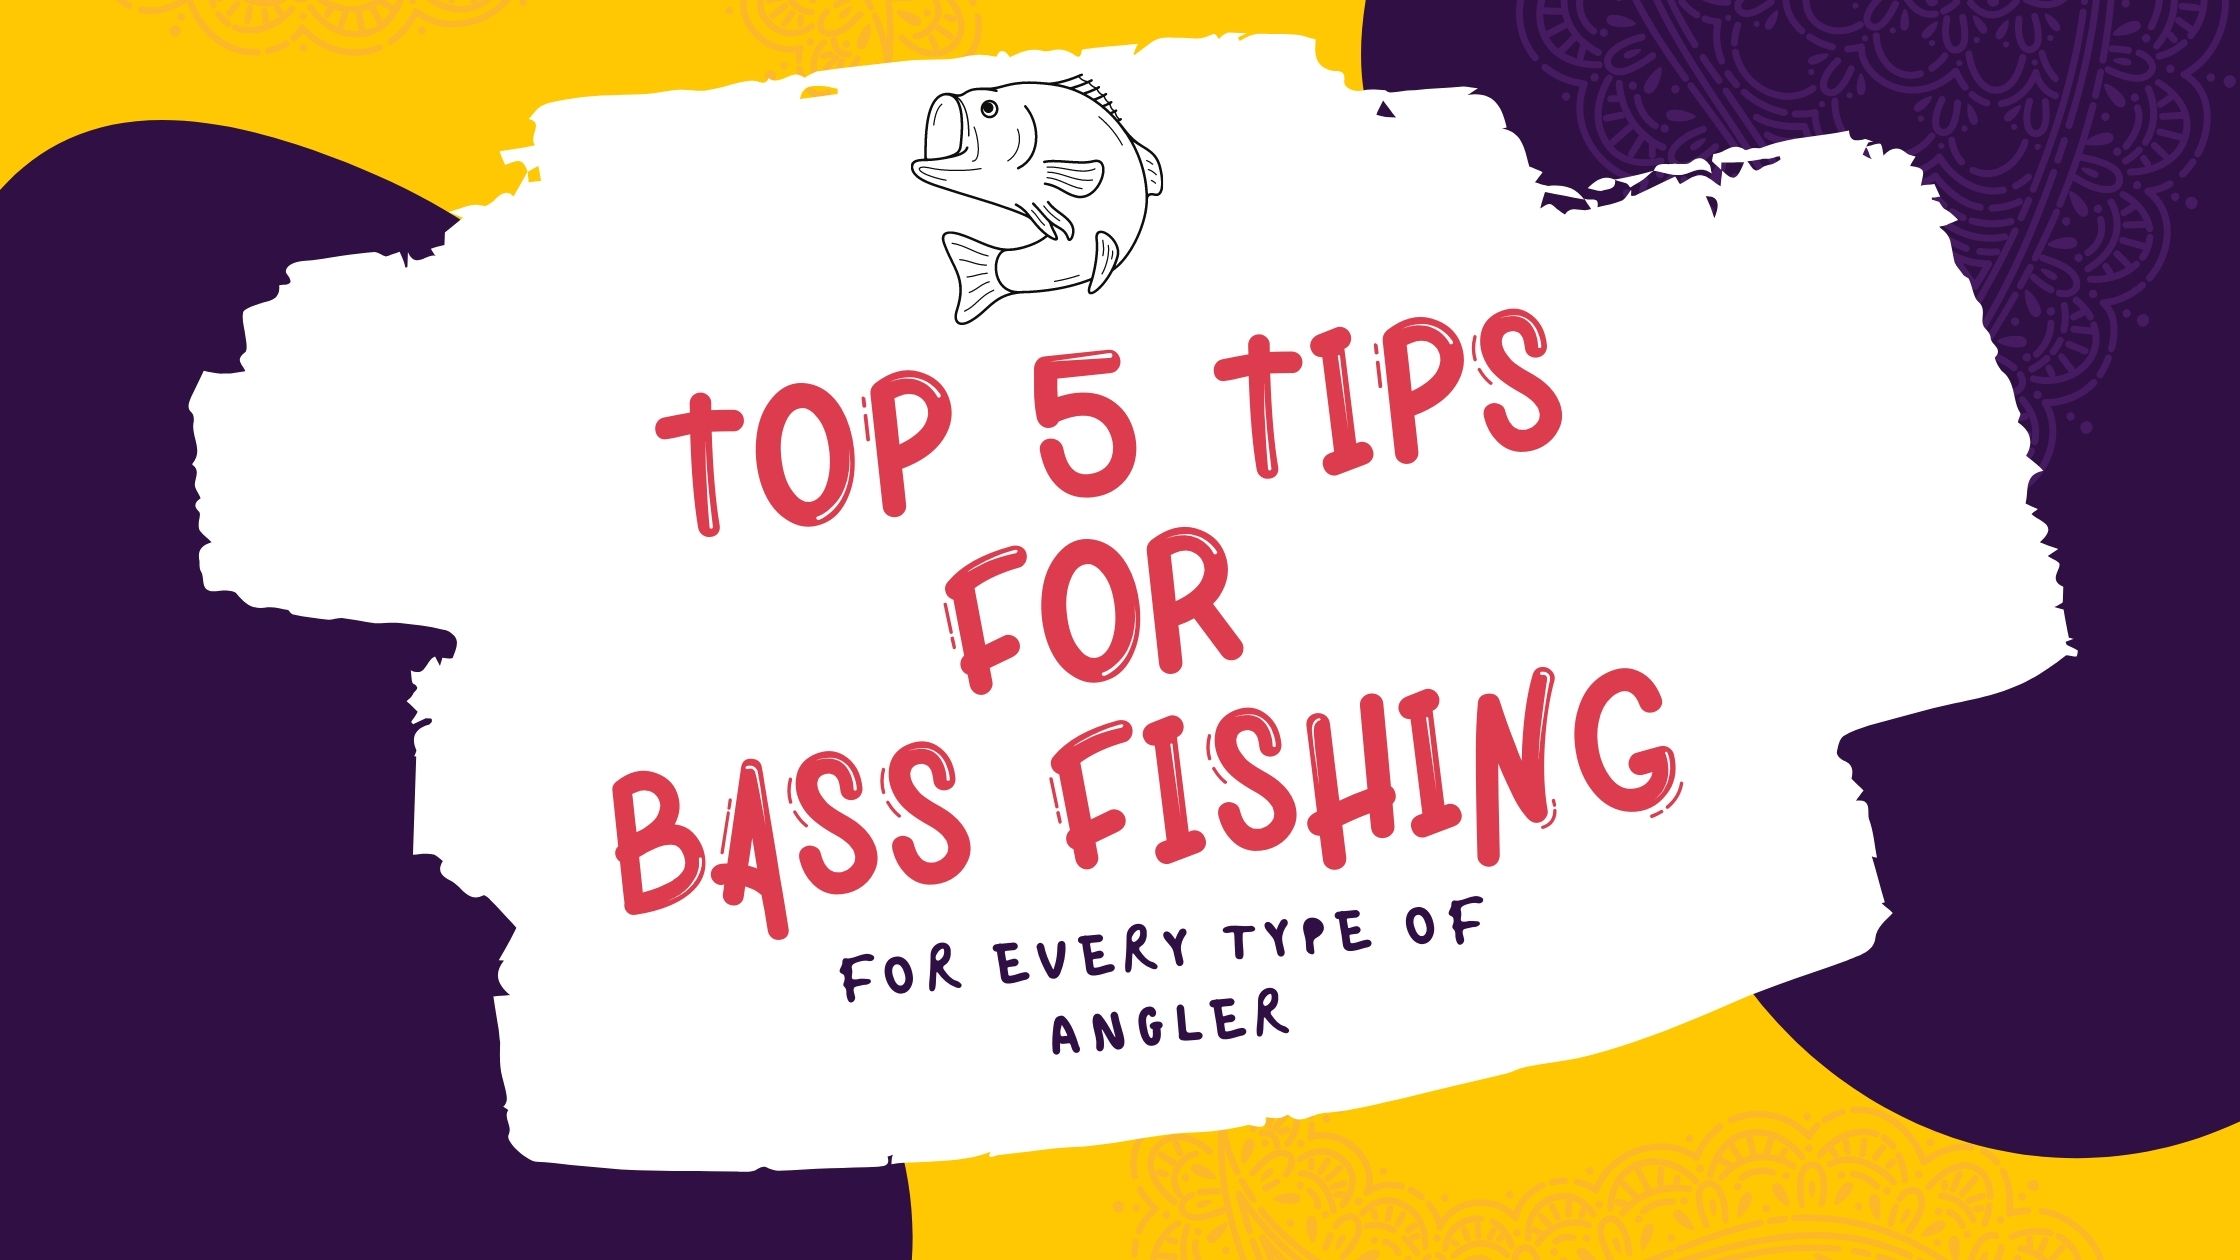 Top 5 Bass Fishing Tips: How to Catch Like a Pro Angler